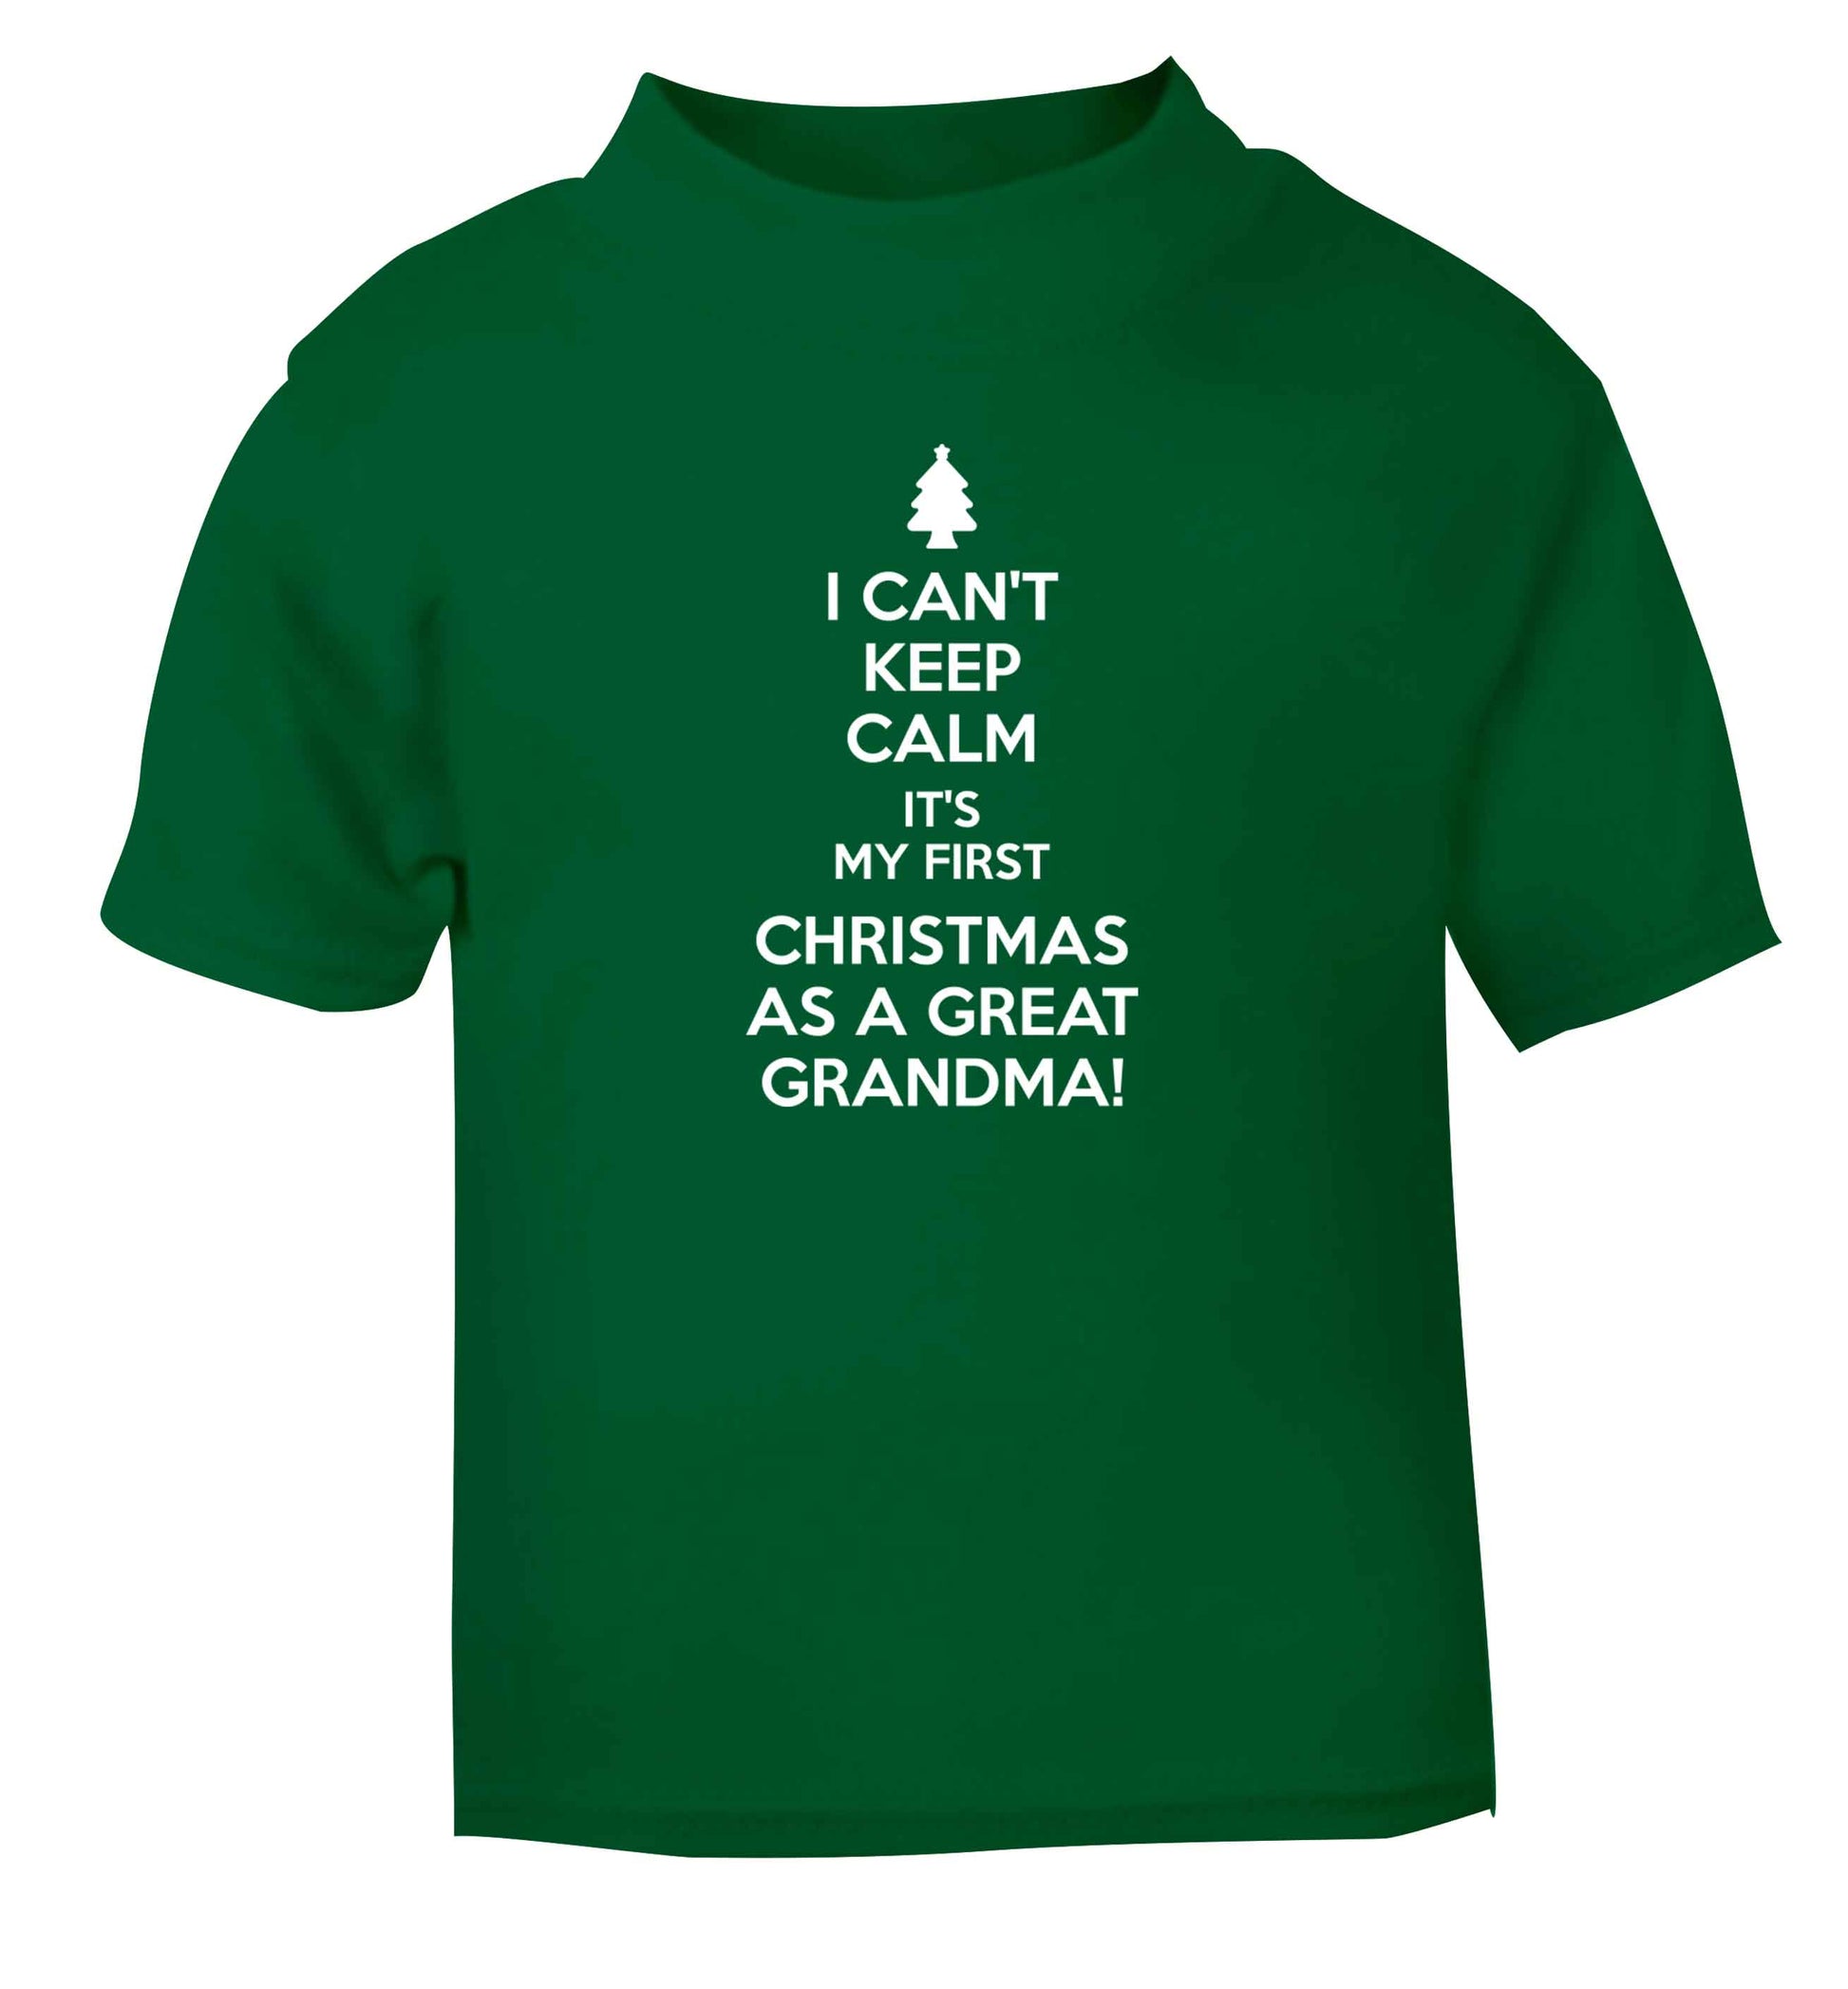 I can't keep calm it's my first Christmas as a great grandma! green Baby Toddler Tshirt 2 Years